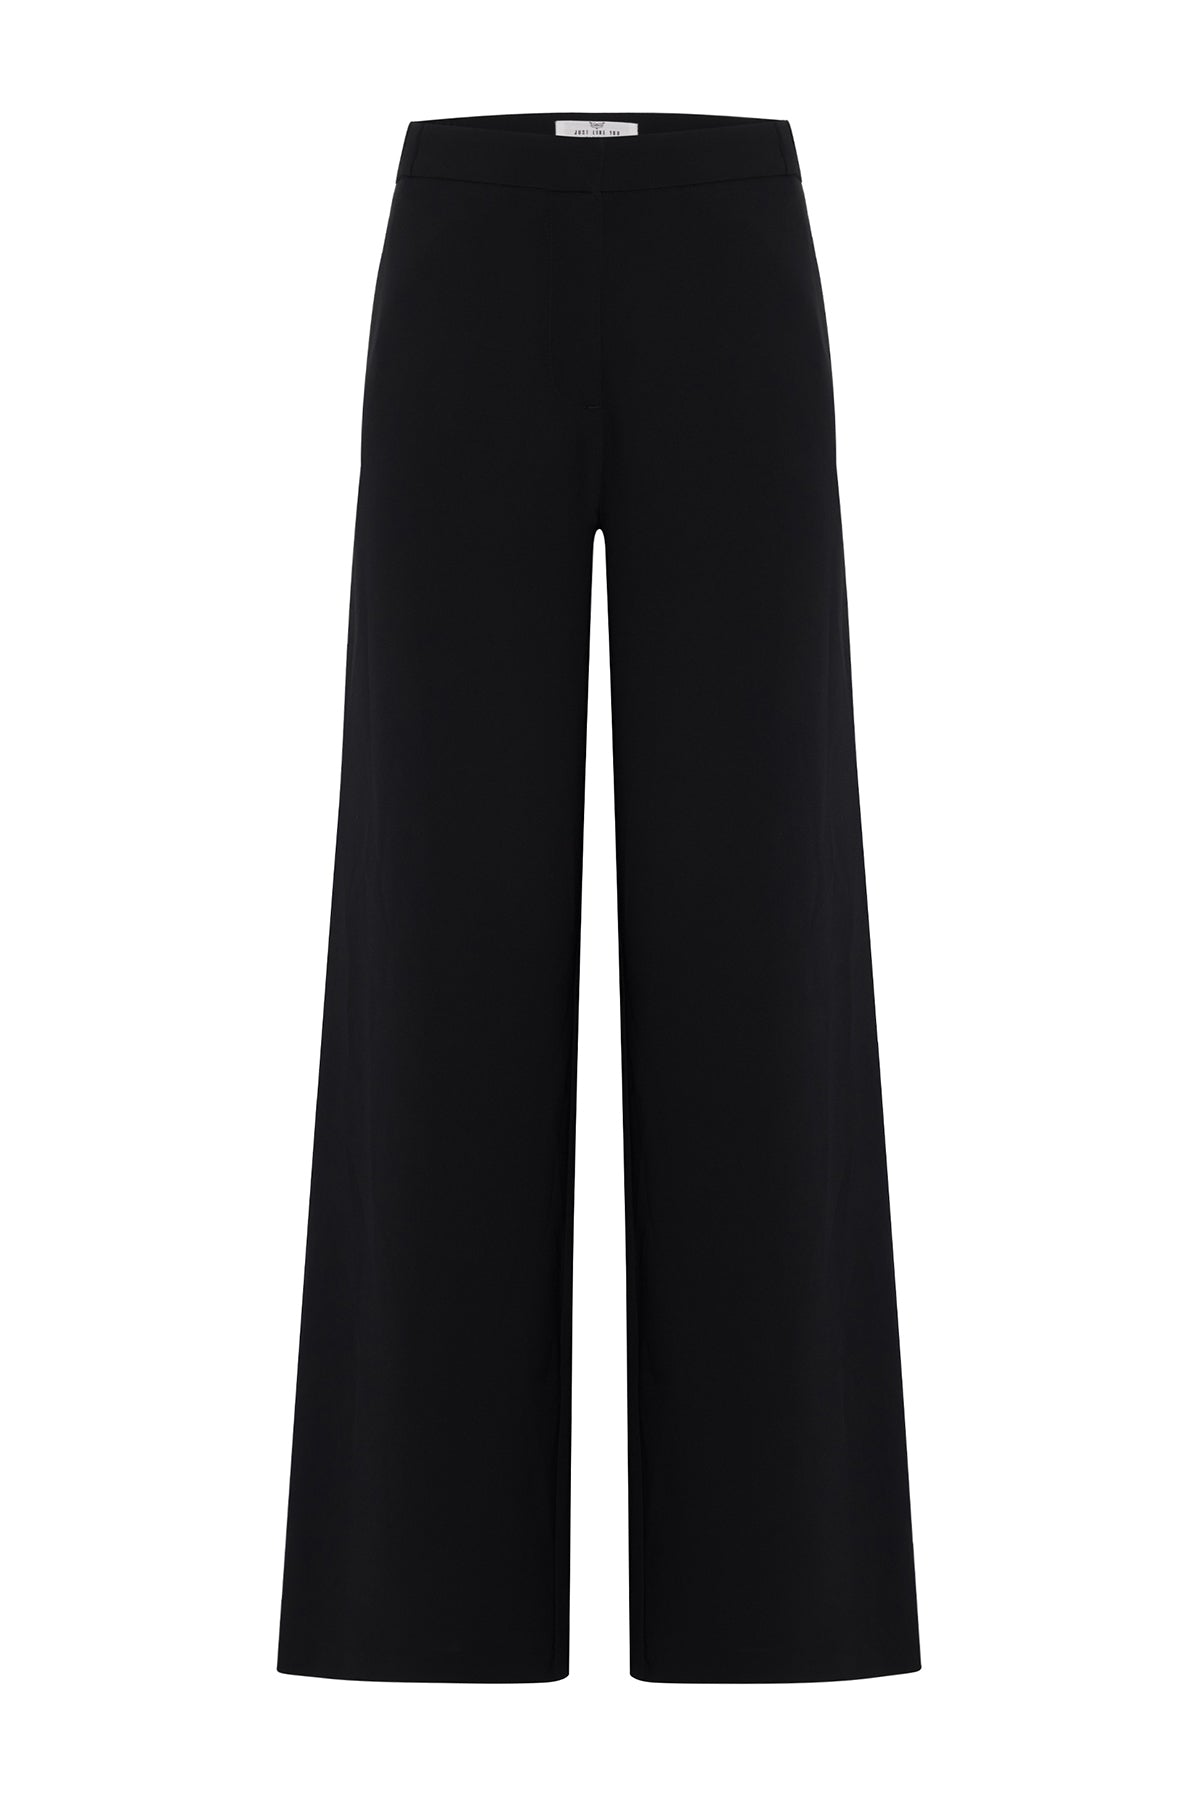 Black Elasticated Waist Loose Fit Trousers